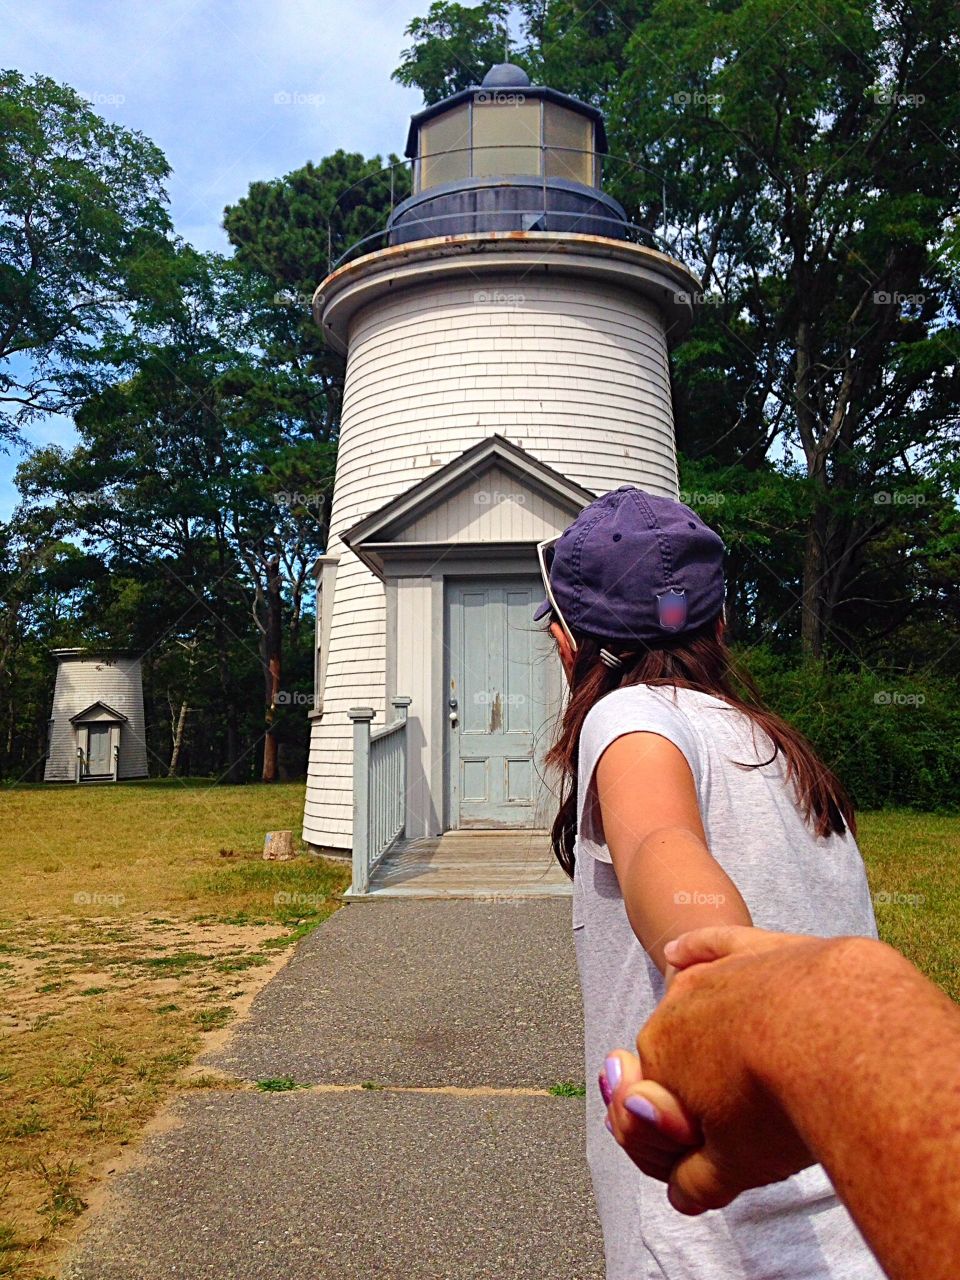 Exploring. Checking out lighthouses - follow me to mission
